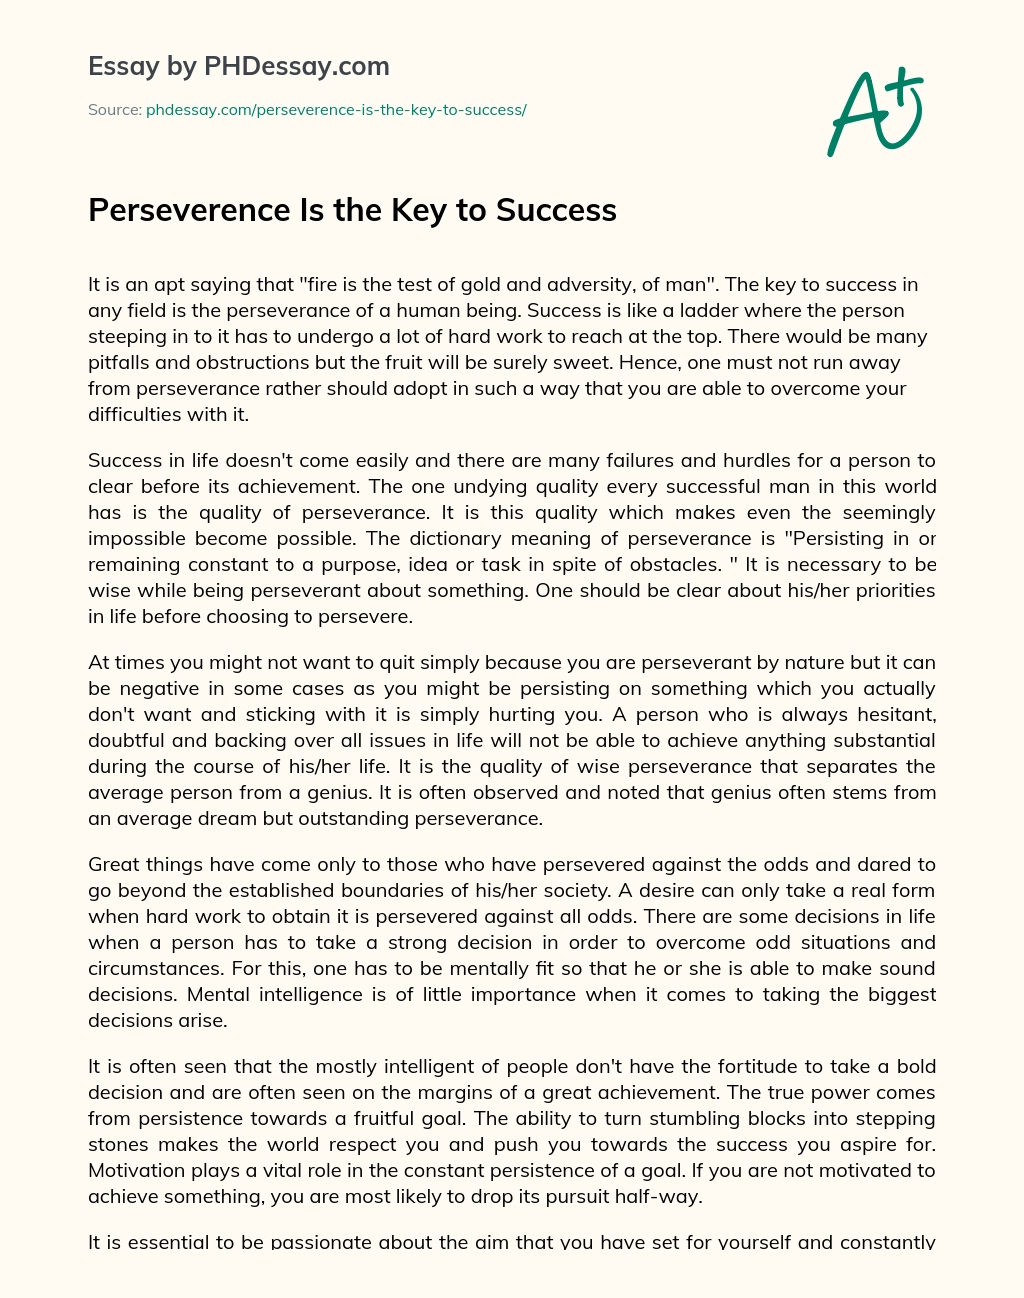 Perseverence Is the Key to Success essay